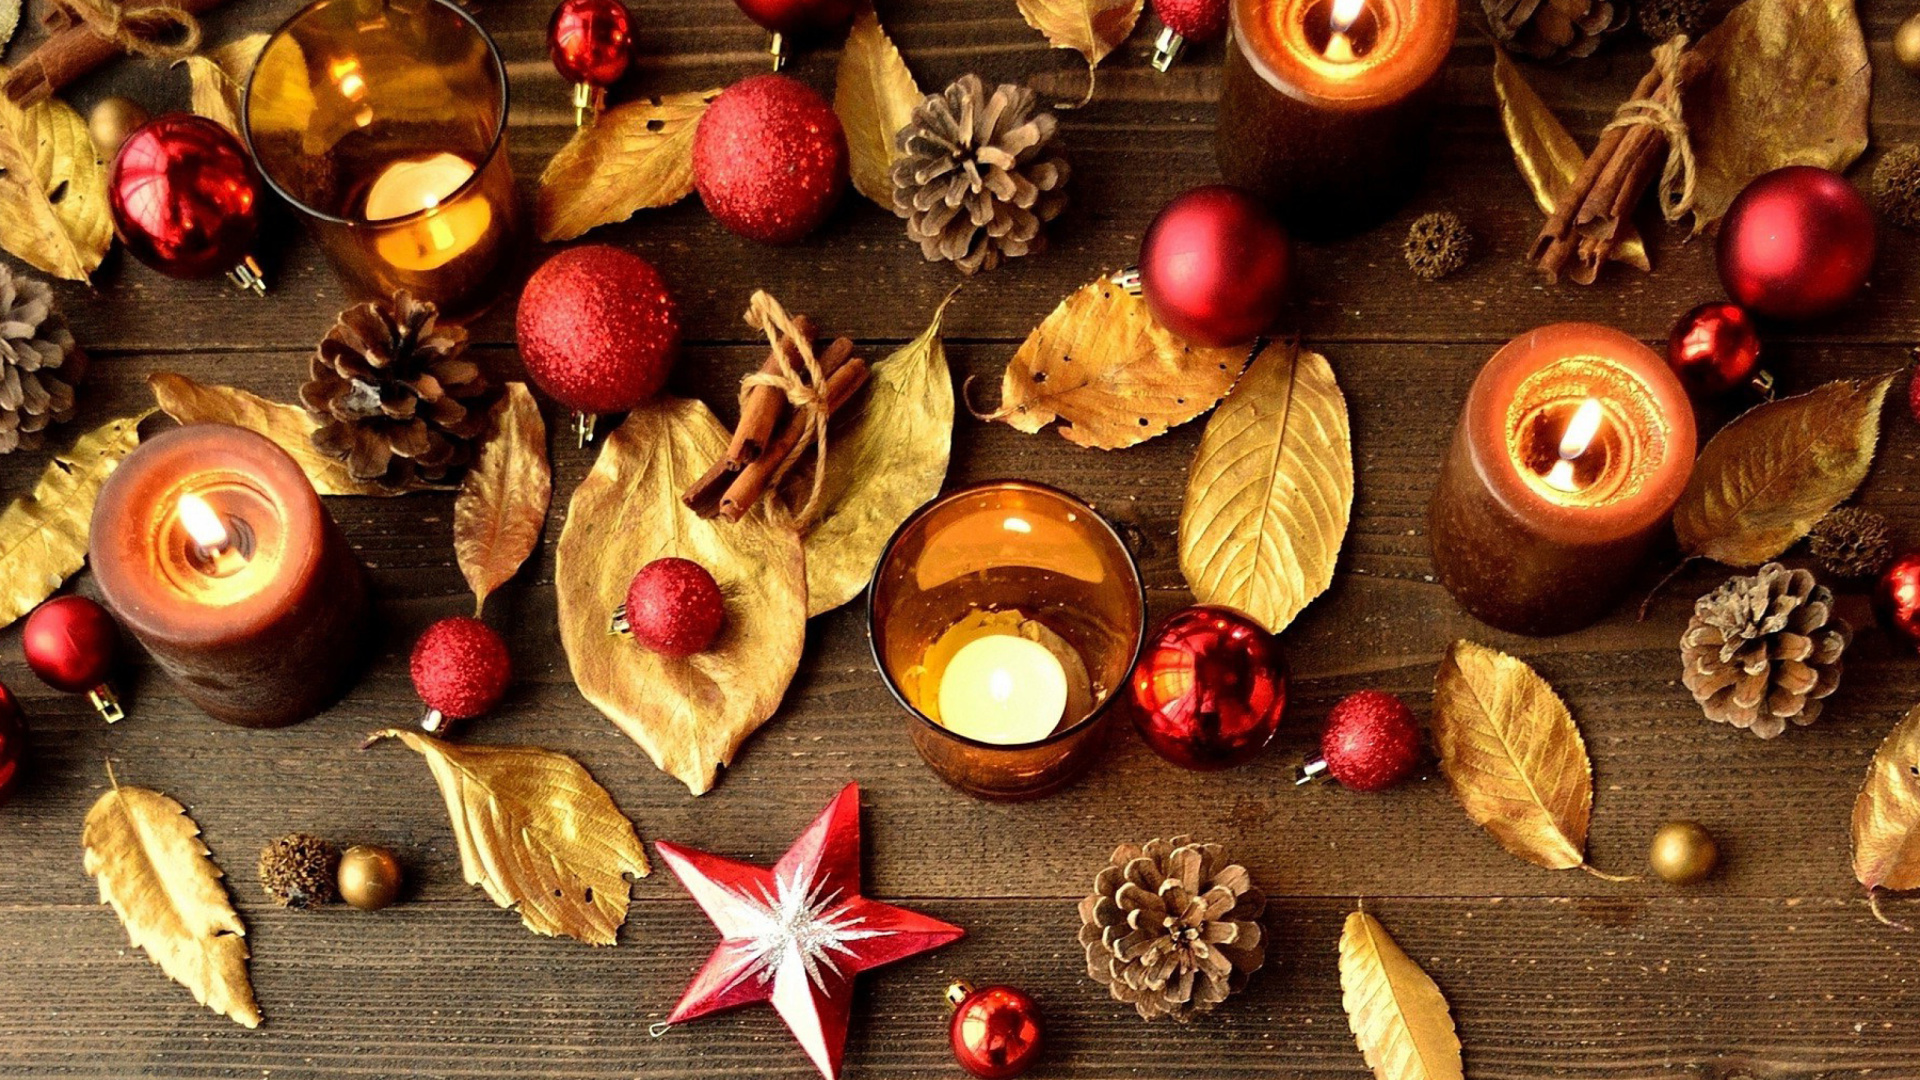 Charming Winter Table Decorations for Comfort wallpaper 1920x1080